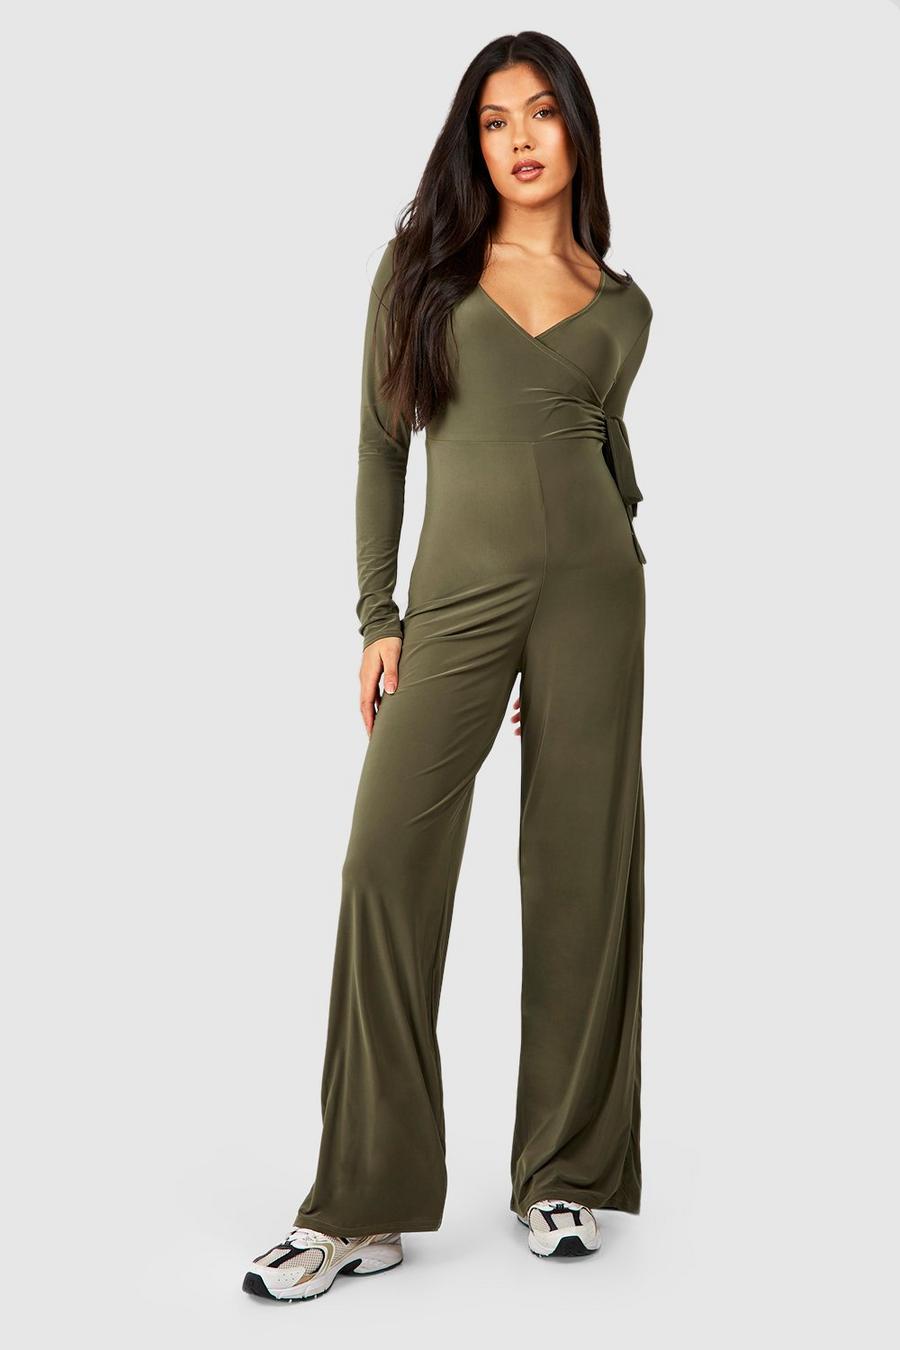 Umstandsmode Soft Touch Loungewear-Jumpsuit, Khaki